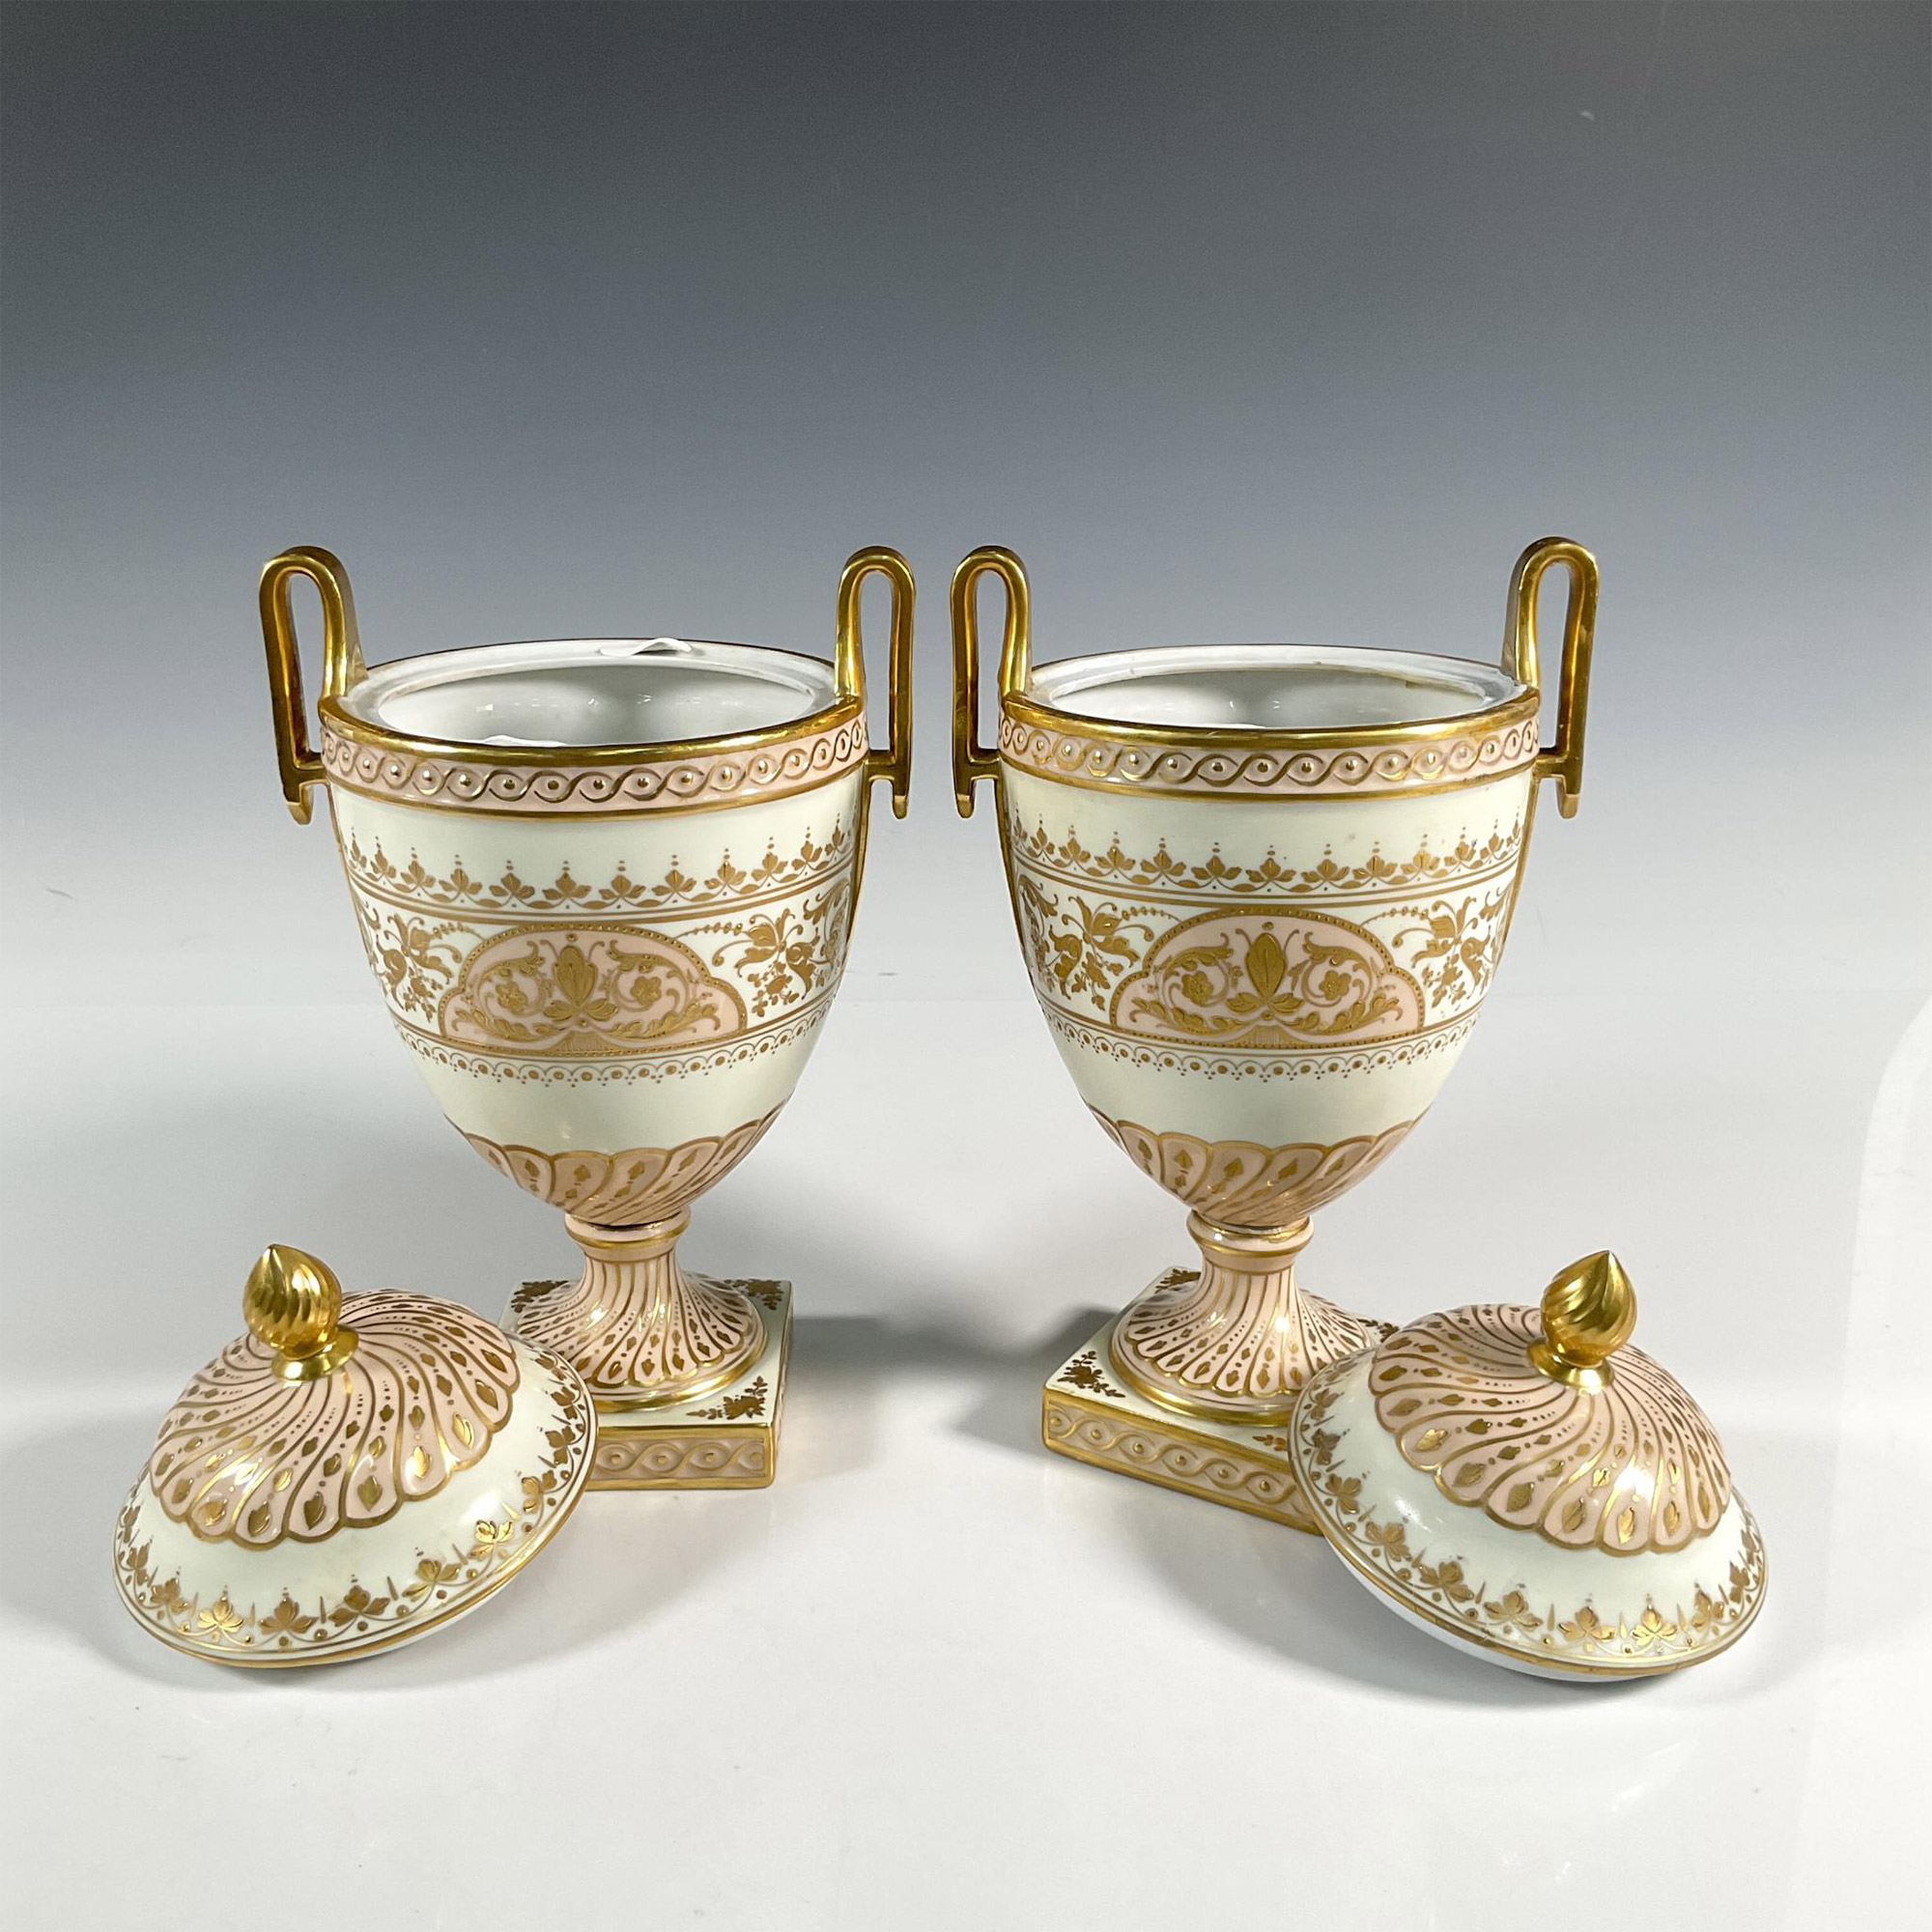 Pair of Dresden Porcelain Vases with Lids - Image 3 of 4